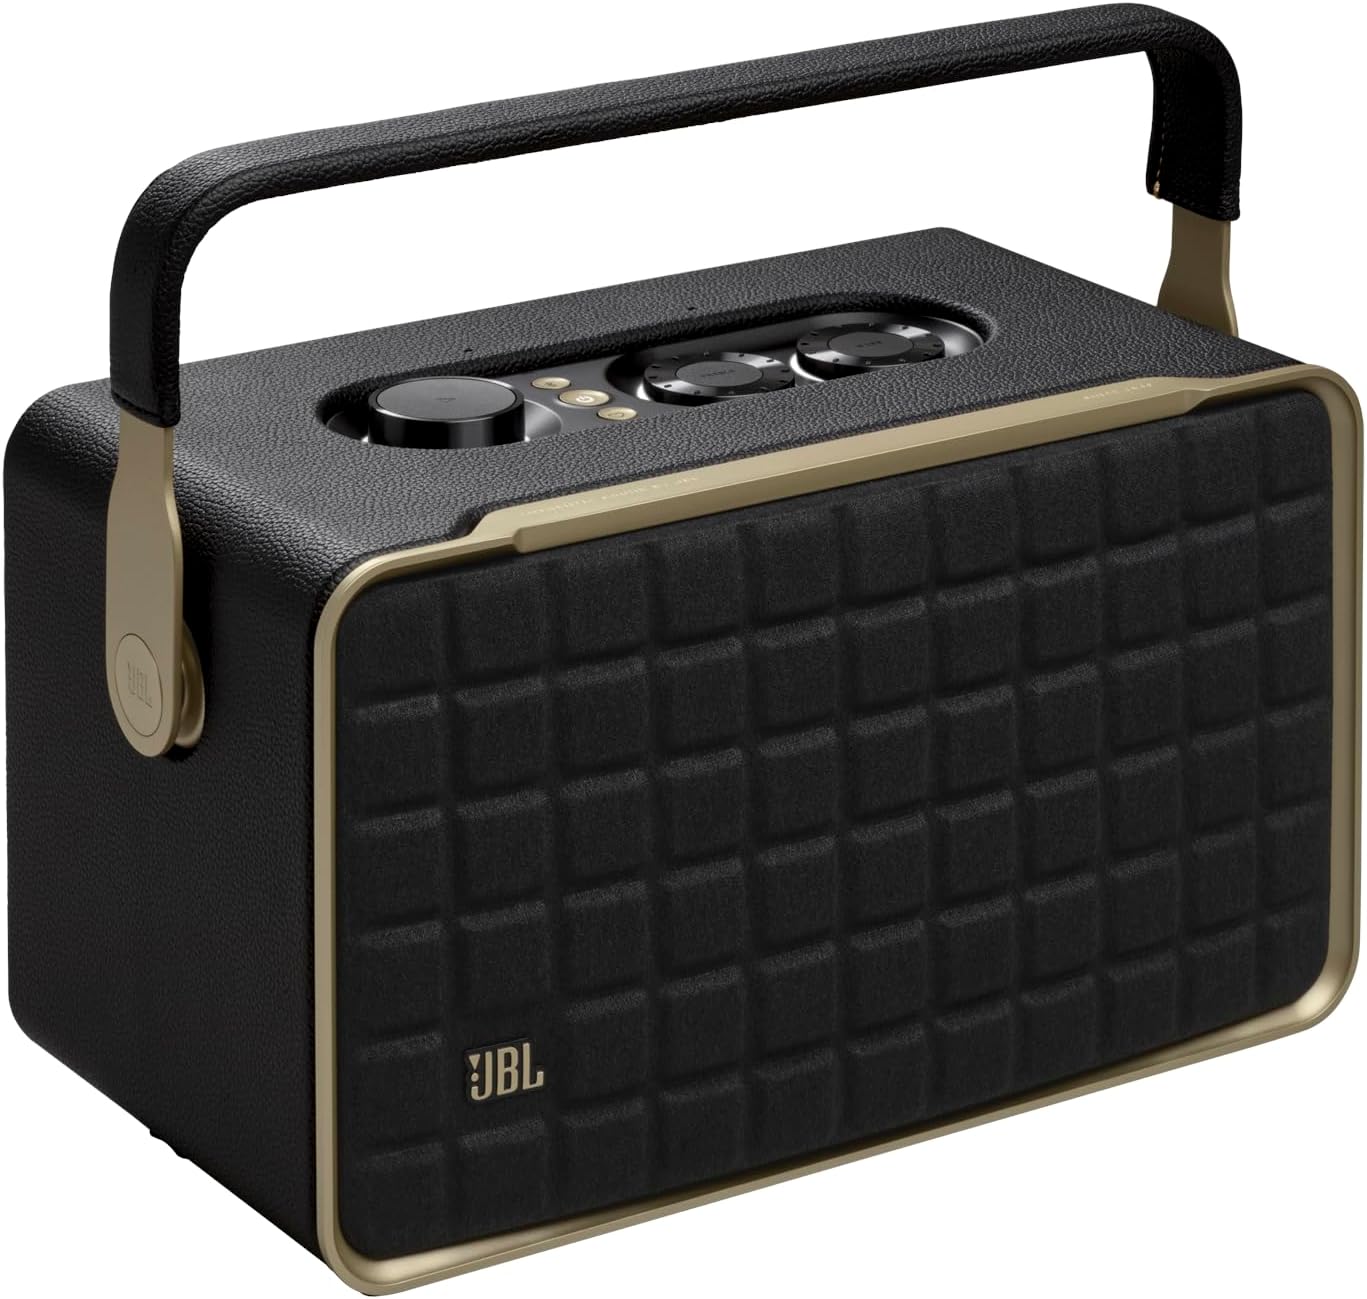 JBL AUTHENTICS 300 Smart home speaker with Wi-Fi, Bluetooth and Voice Assistants with retro design Mahajan Electronics Online